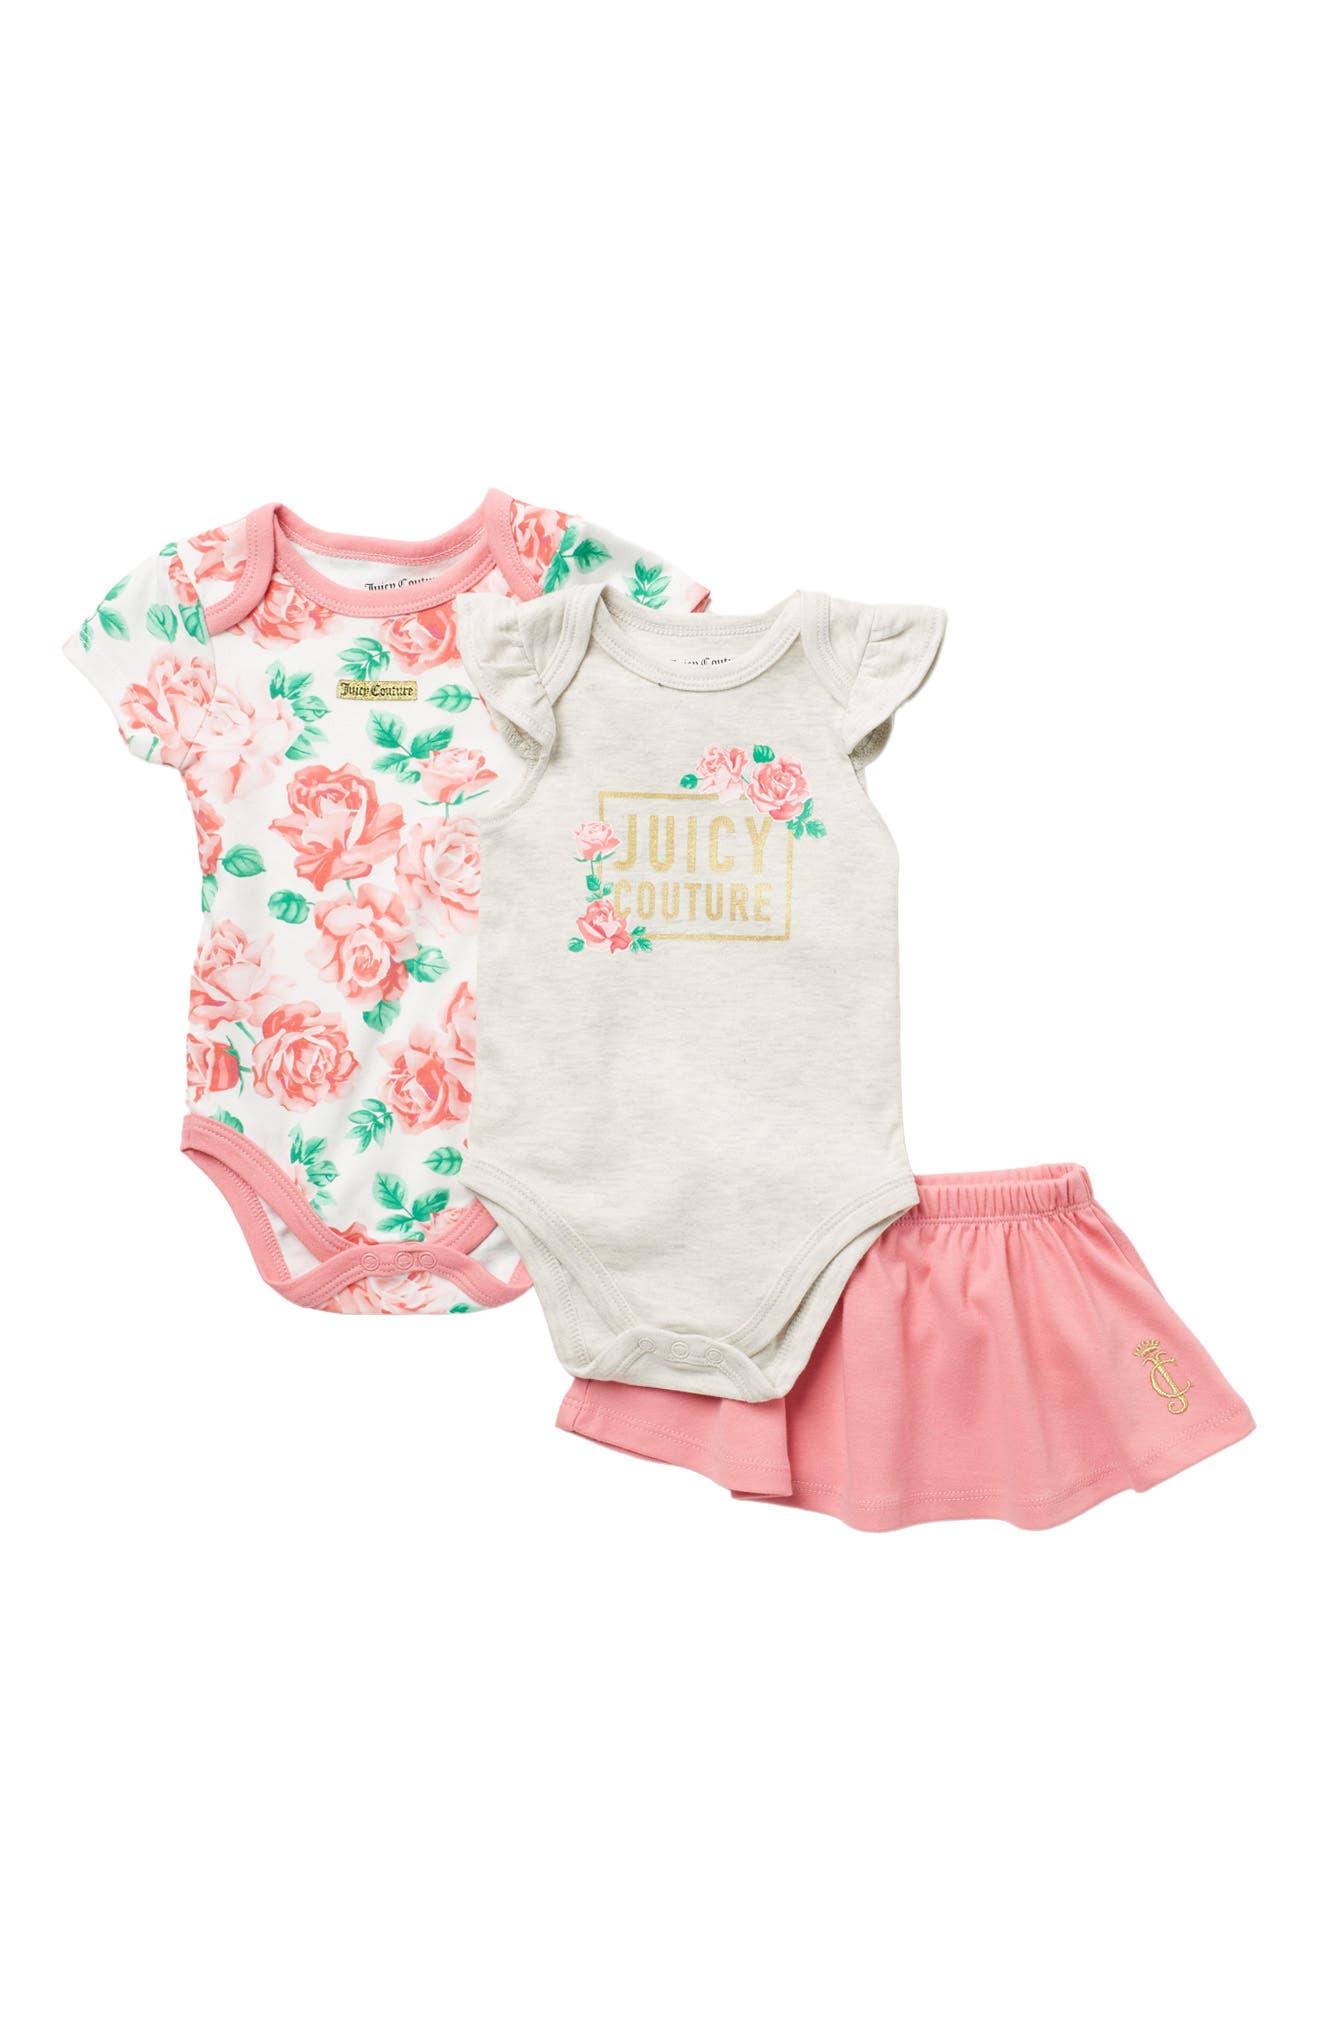 Juicy Couture Floral Bodysuit & Skirt Outfit In Assorted